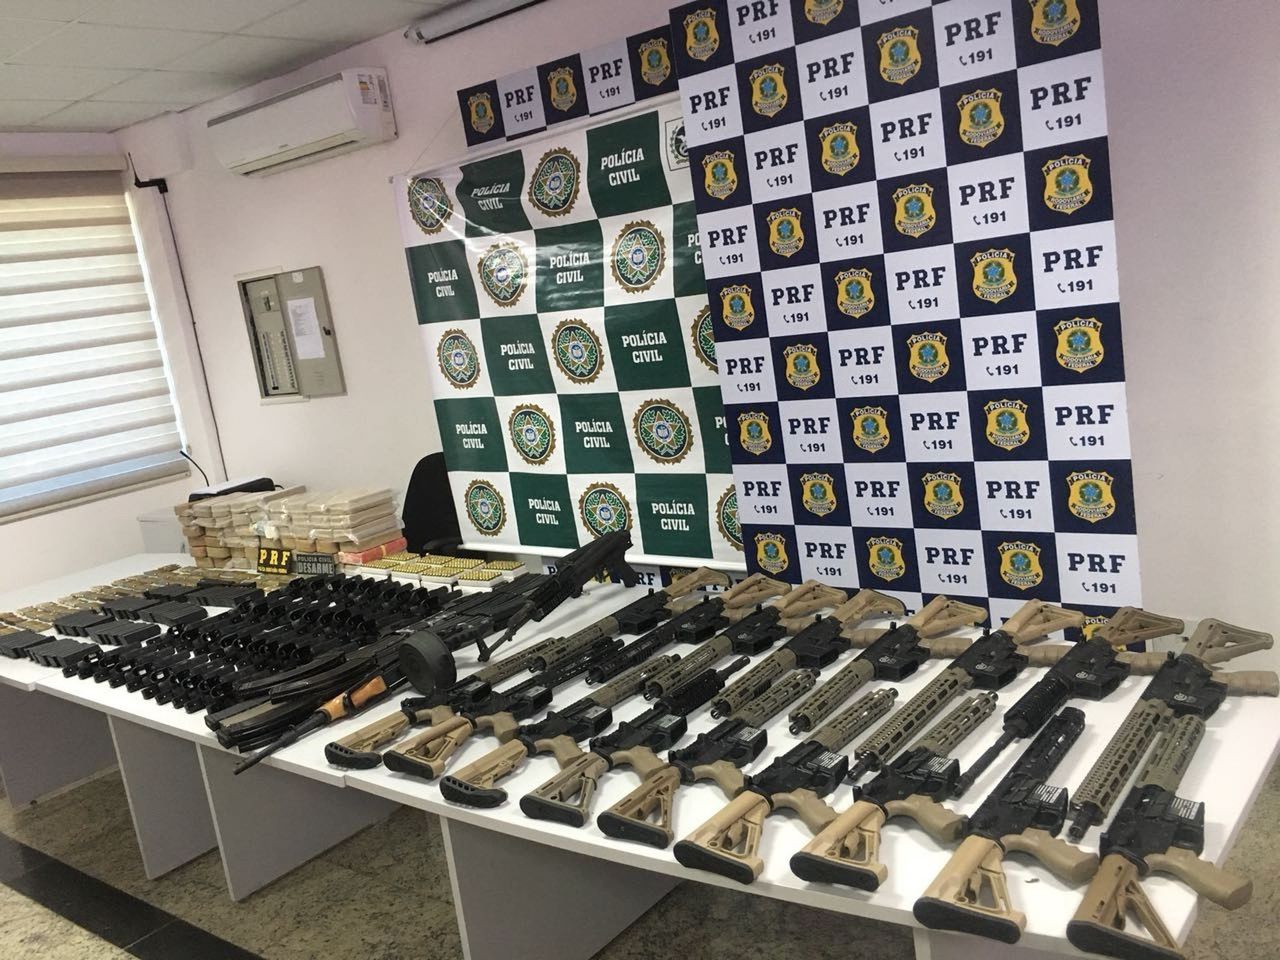 Rifles seized last month in Brazil. On the side of the rifles is an image of the U.S. flag.